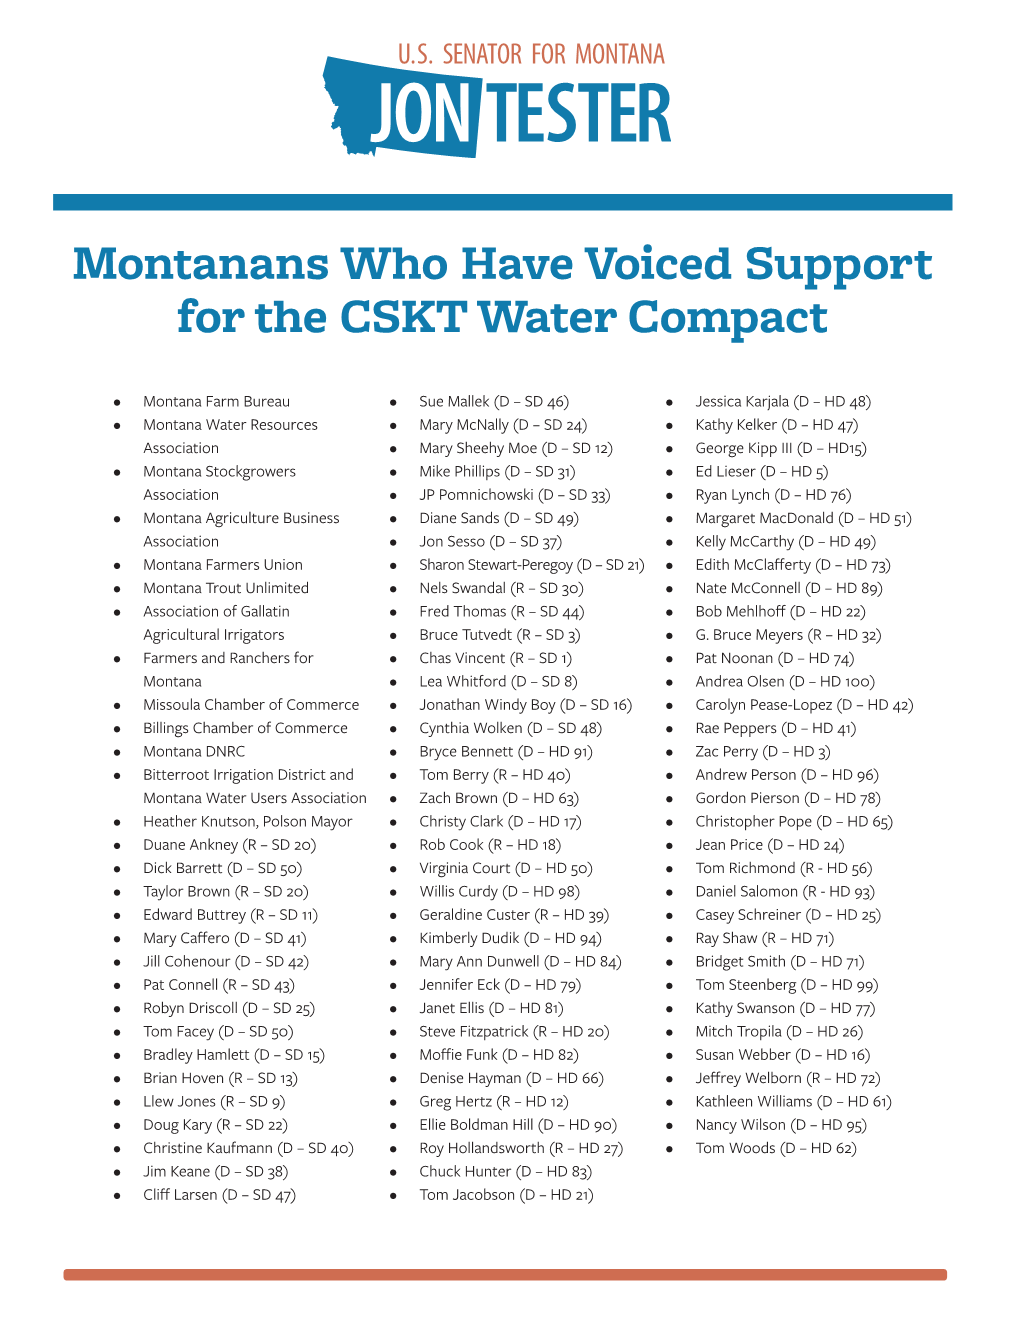 Montanans Who Have Voiced Support for the CSKT Water Compact